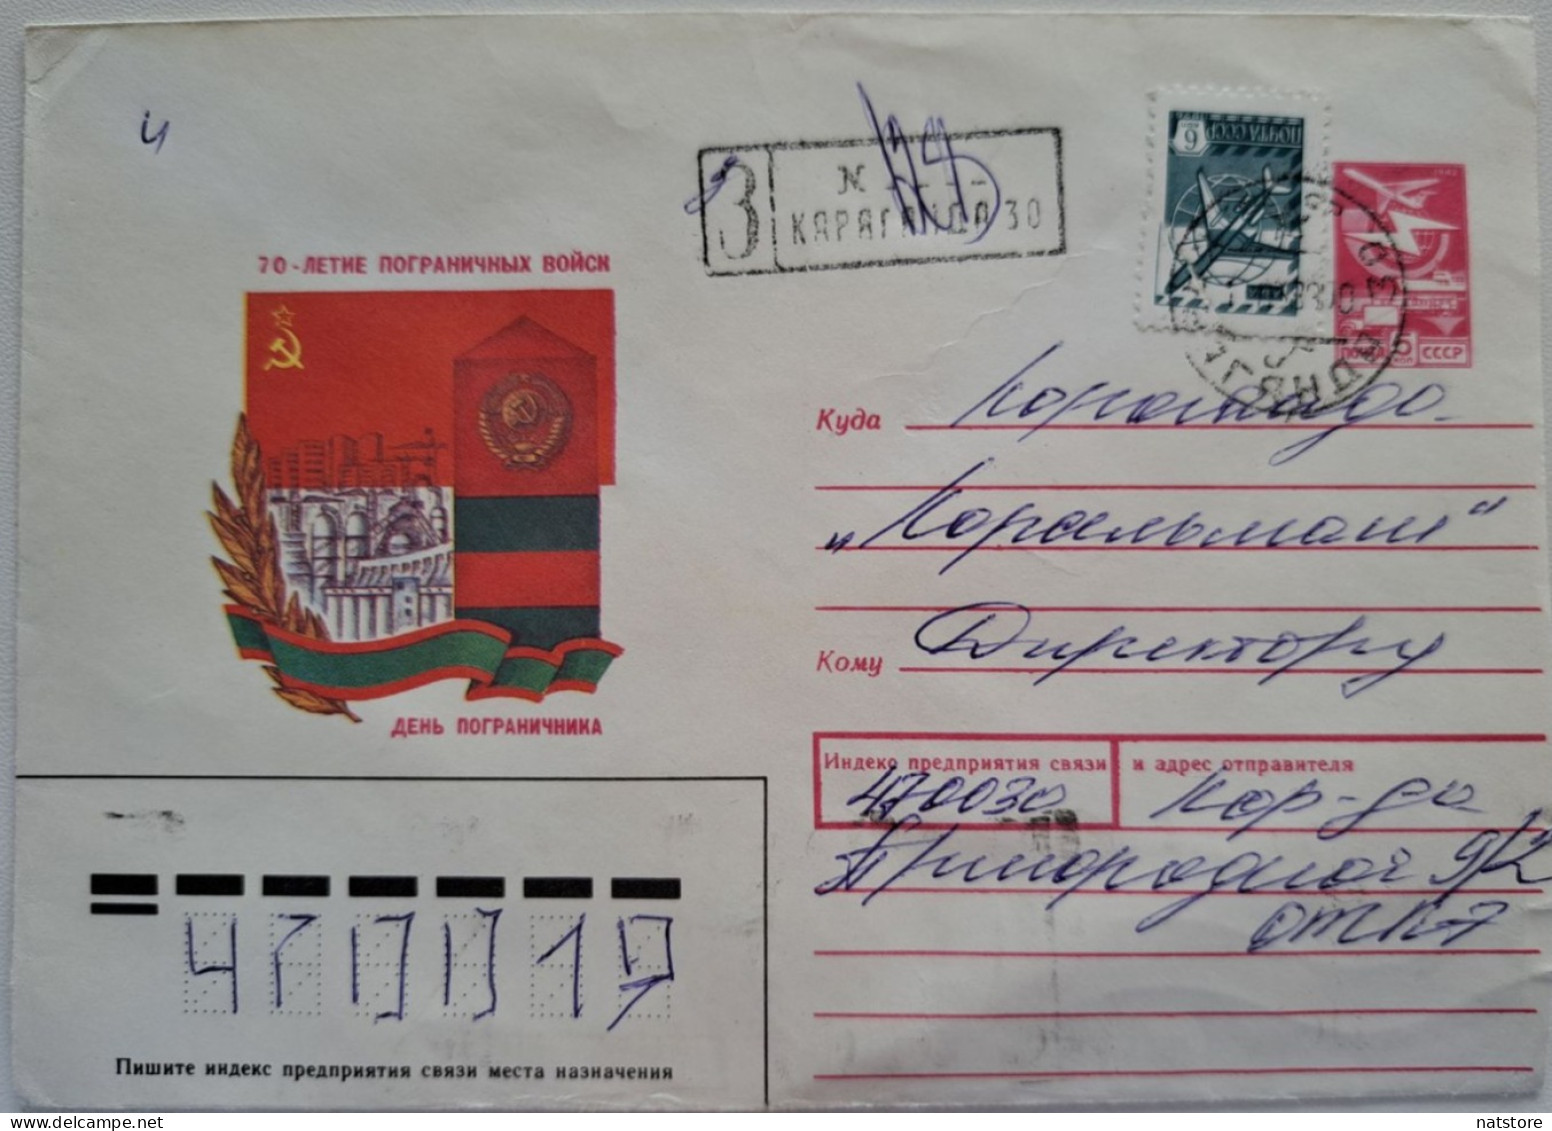 1988..USSR..COVER WITH   STAMP..PAST MAIL..REGISTERED.70th ANNIVERSARY OF BORDER FORCES! - Covers & Documents